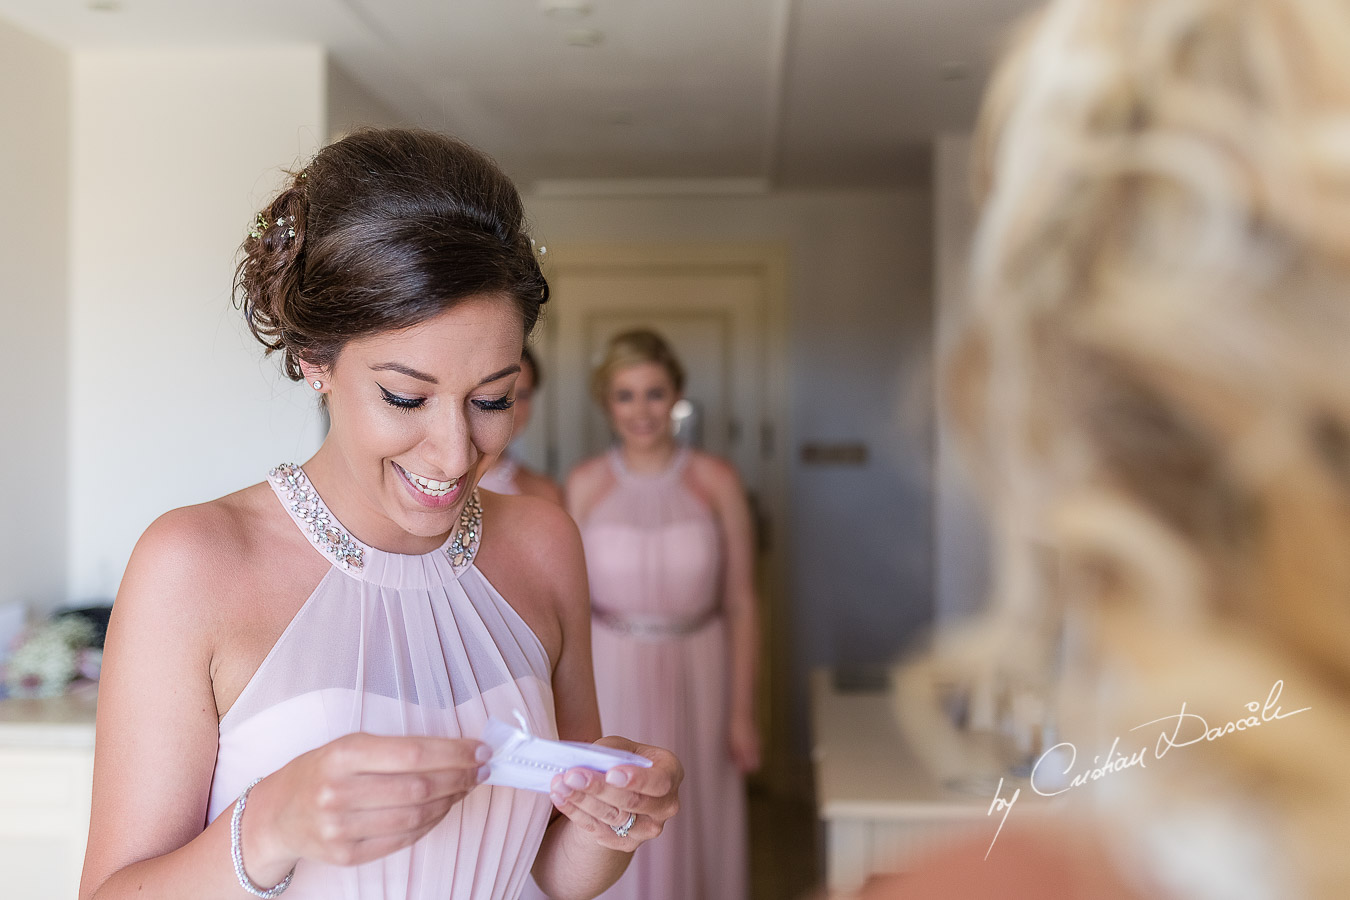 Emotional moment between the bride and maid of honor captured during a wedding at Aphrodite Hills Resort in Cyprus by Cyprus Photographer Cristian Dascalu.